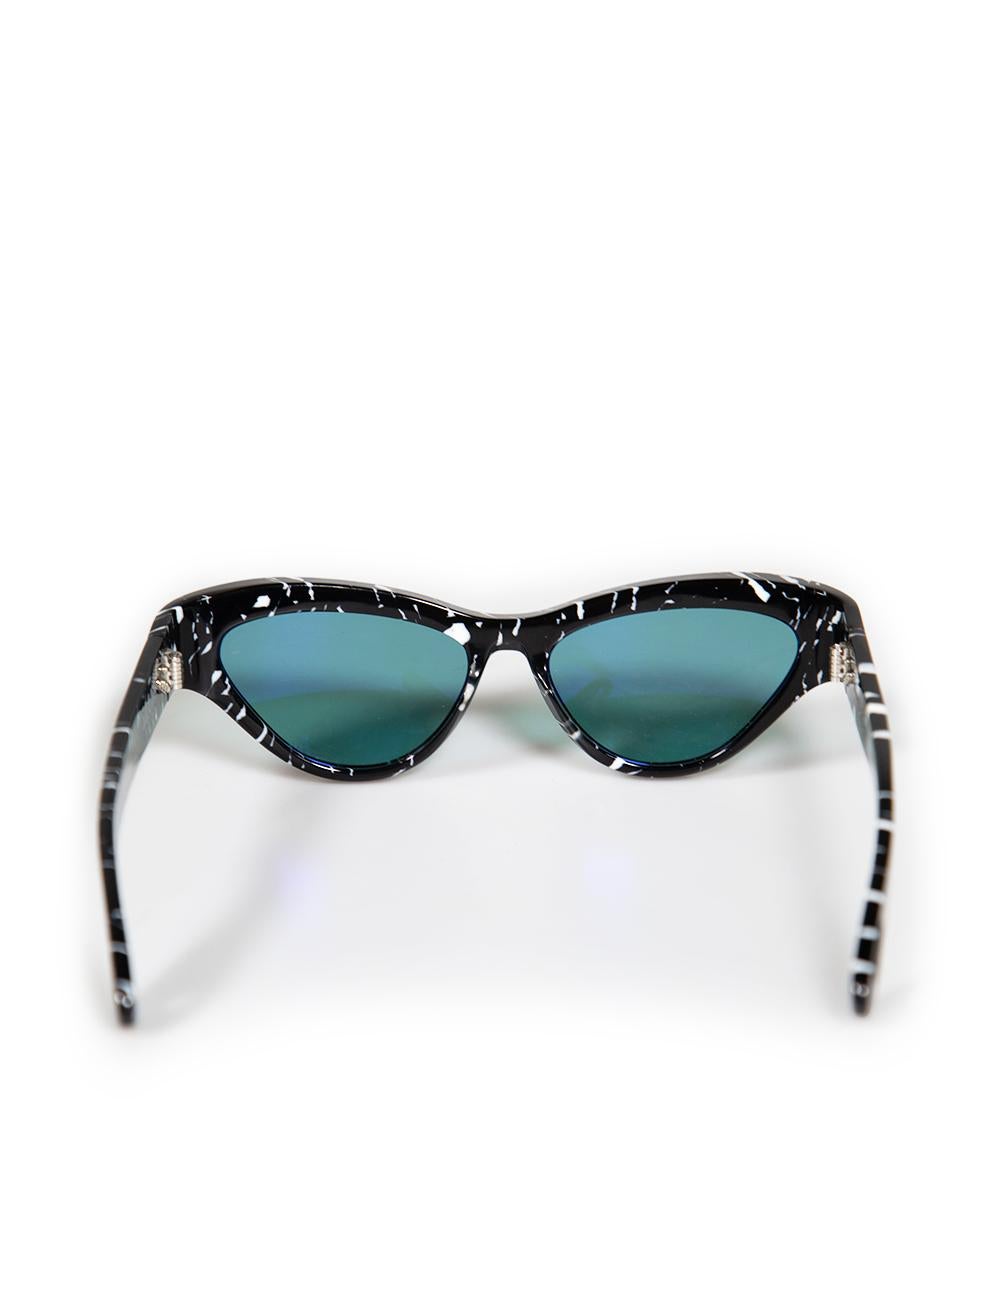 Jacques Marie Mage Black Slade Cat Eye Sunglasses In Excellent Condition For Sale In London, GB